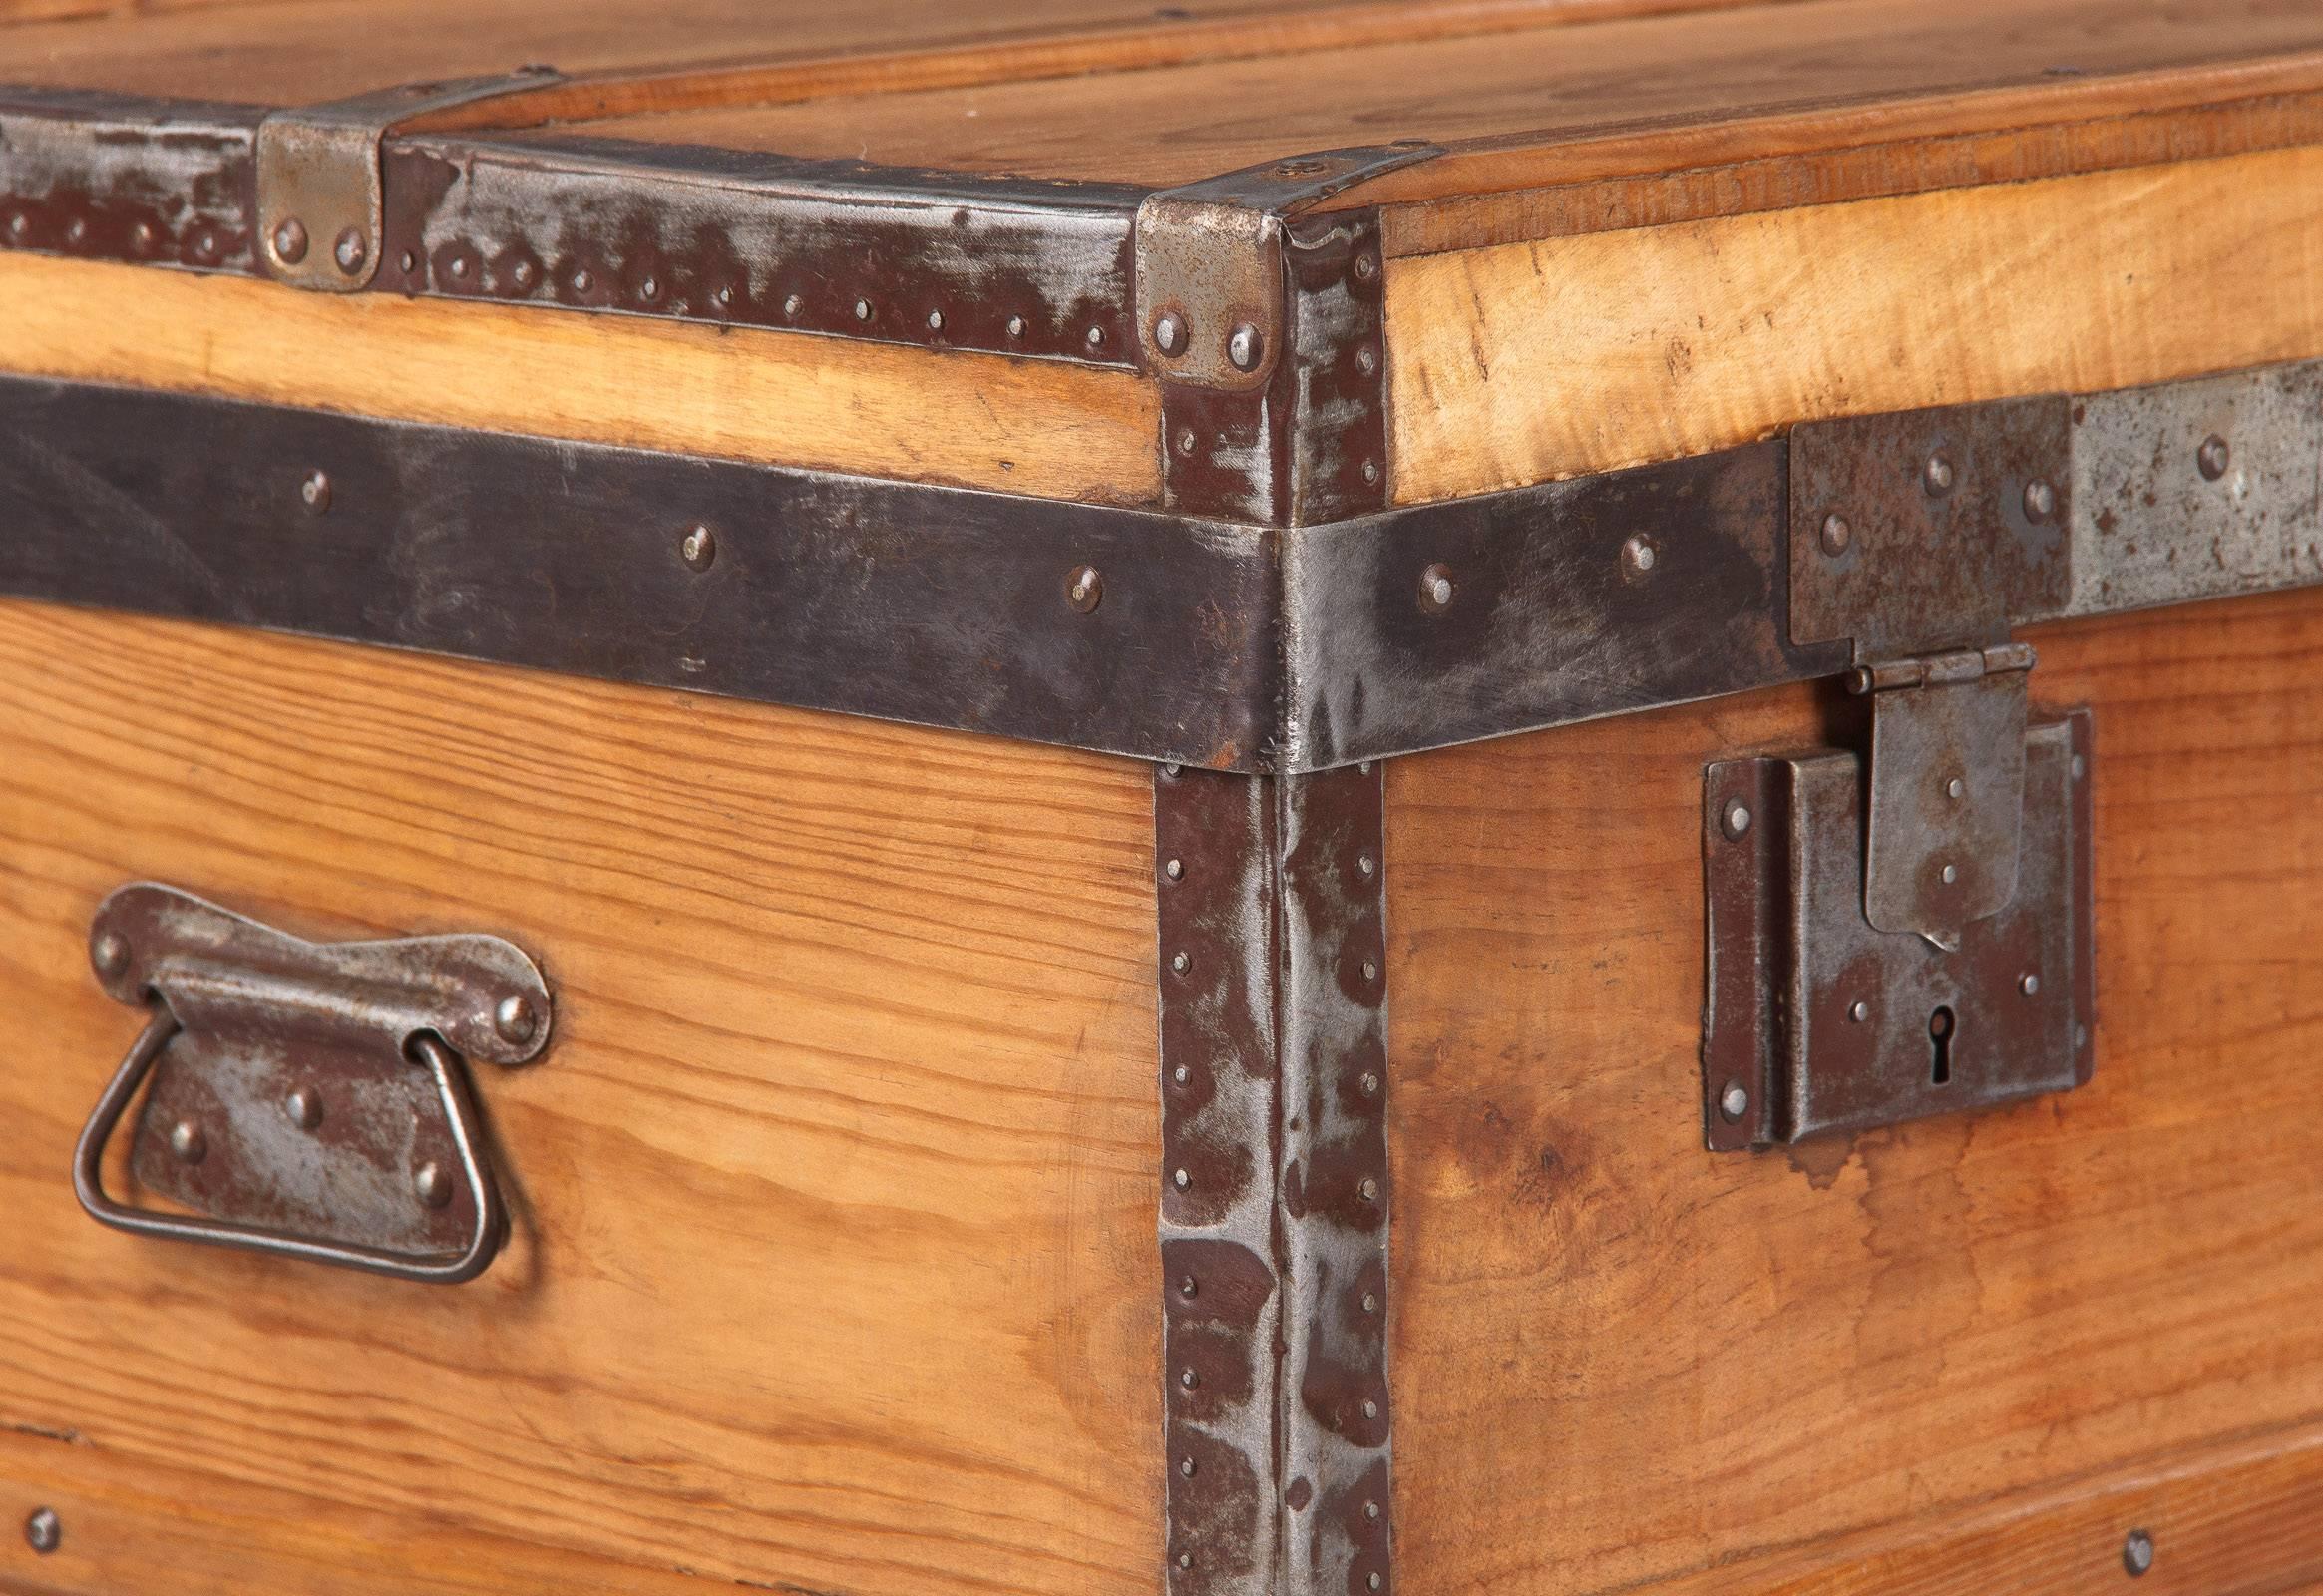 A handsome French traveling trunk, circa 1920s, made of pinewood with silver metal trim, handles and locks. The original key is available. Clean lines, great storage piece that will work perfectly as a coffee or side table.